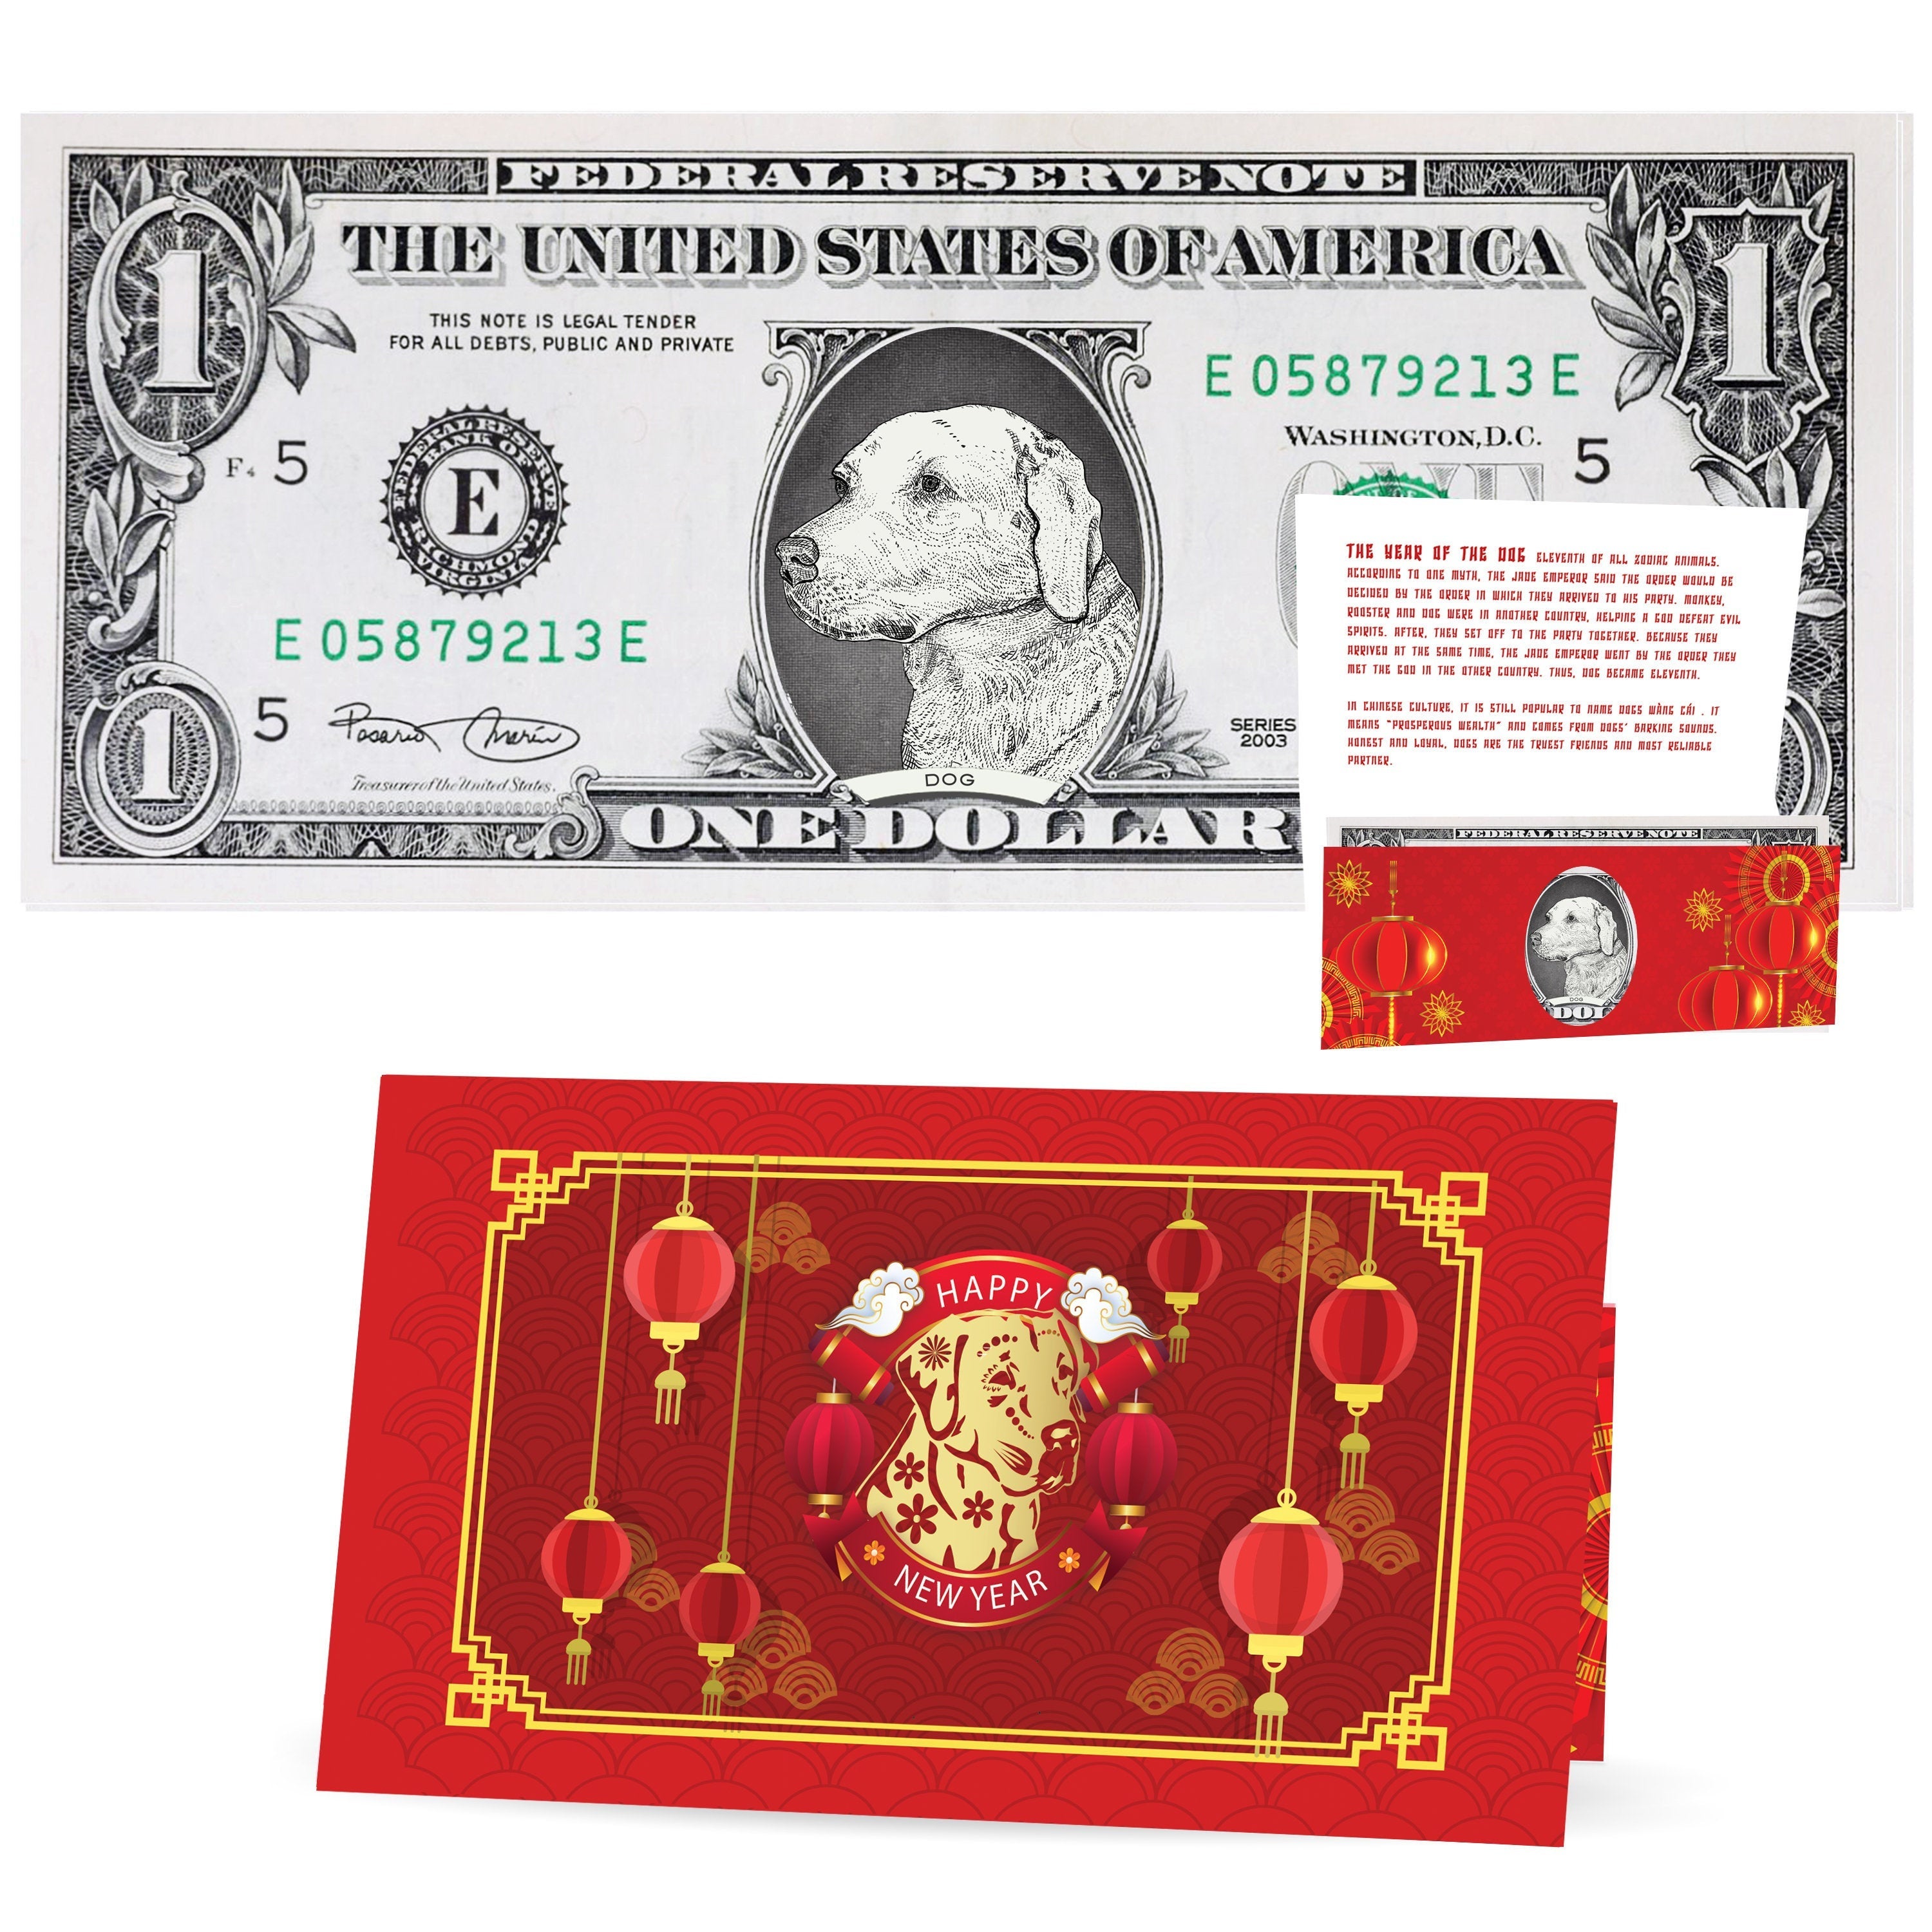 Chinese New Year 2021: The Best Red Packets This Year of the Ox